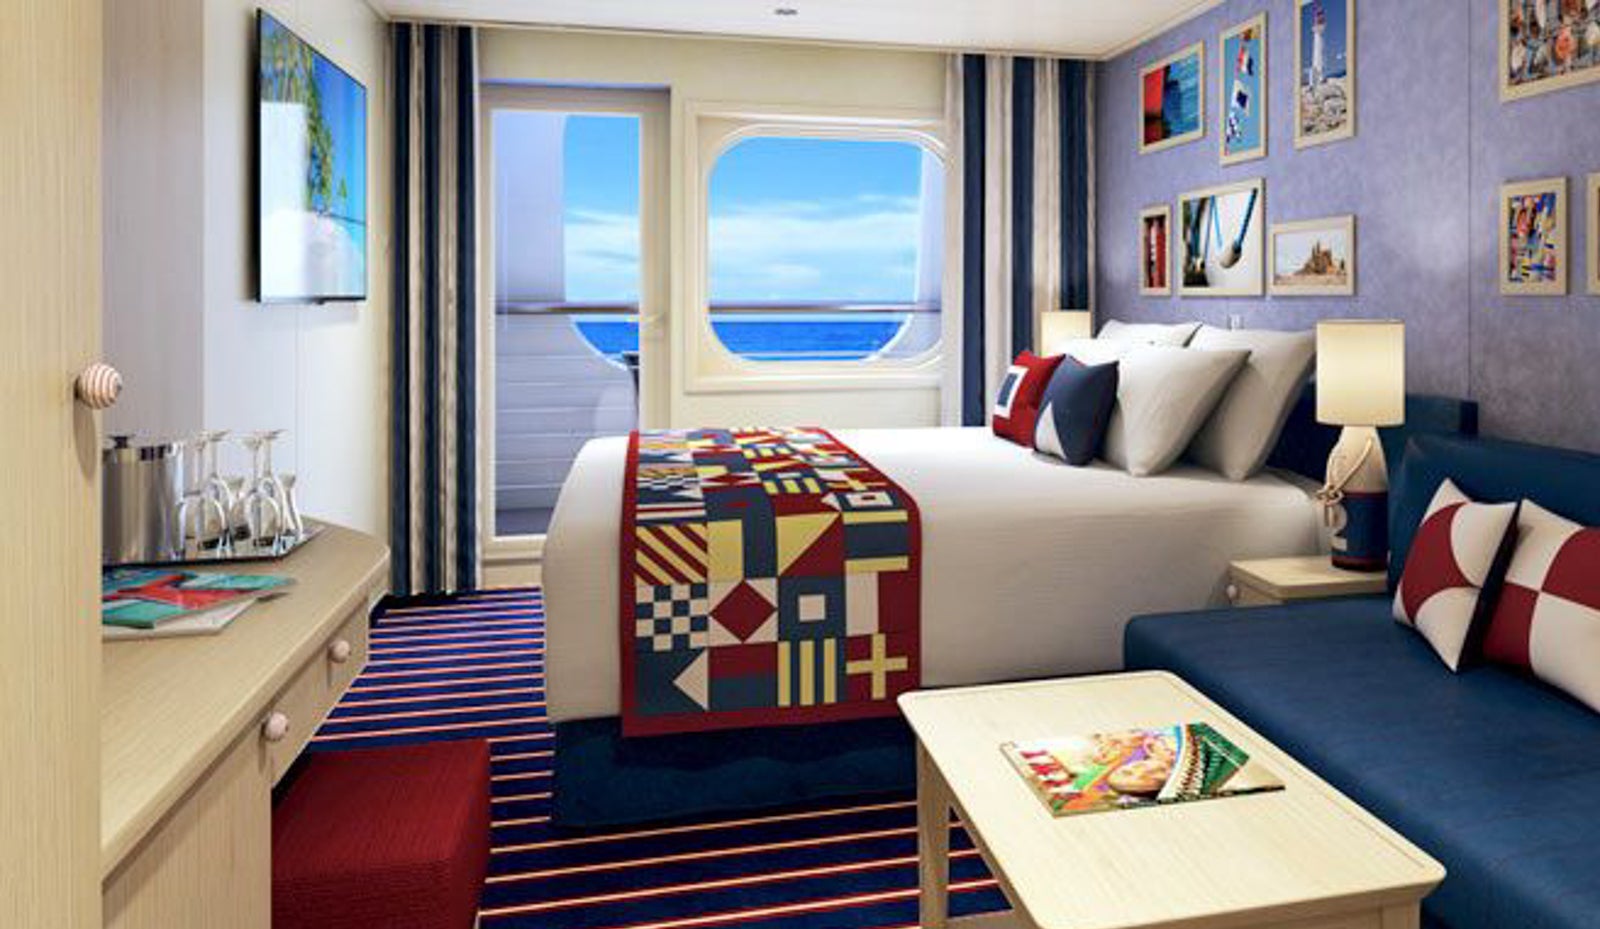 Suites On Carnival Cruise Line Ships, Carnival Cruise Rooms With Bunk Beds